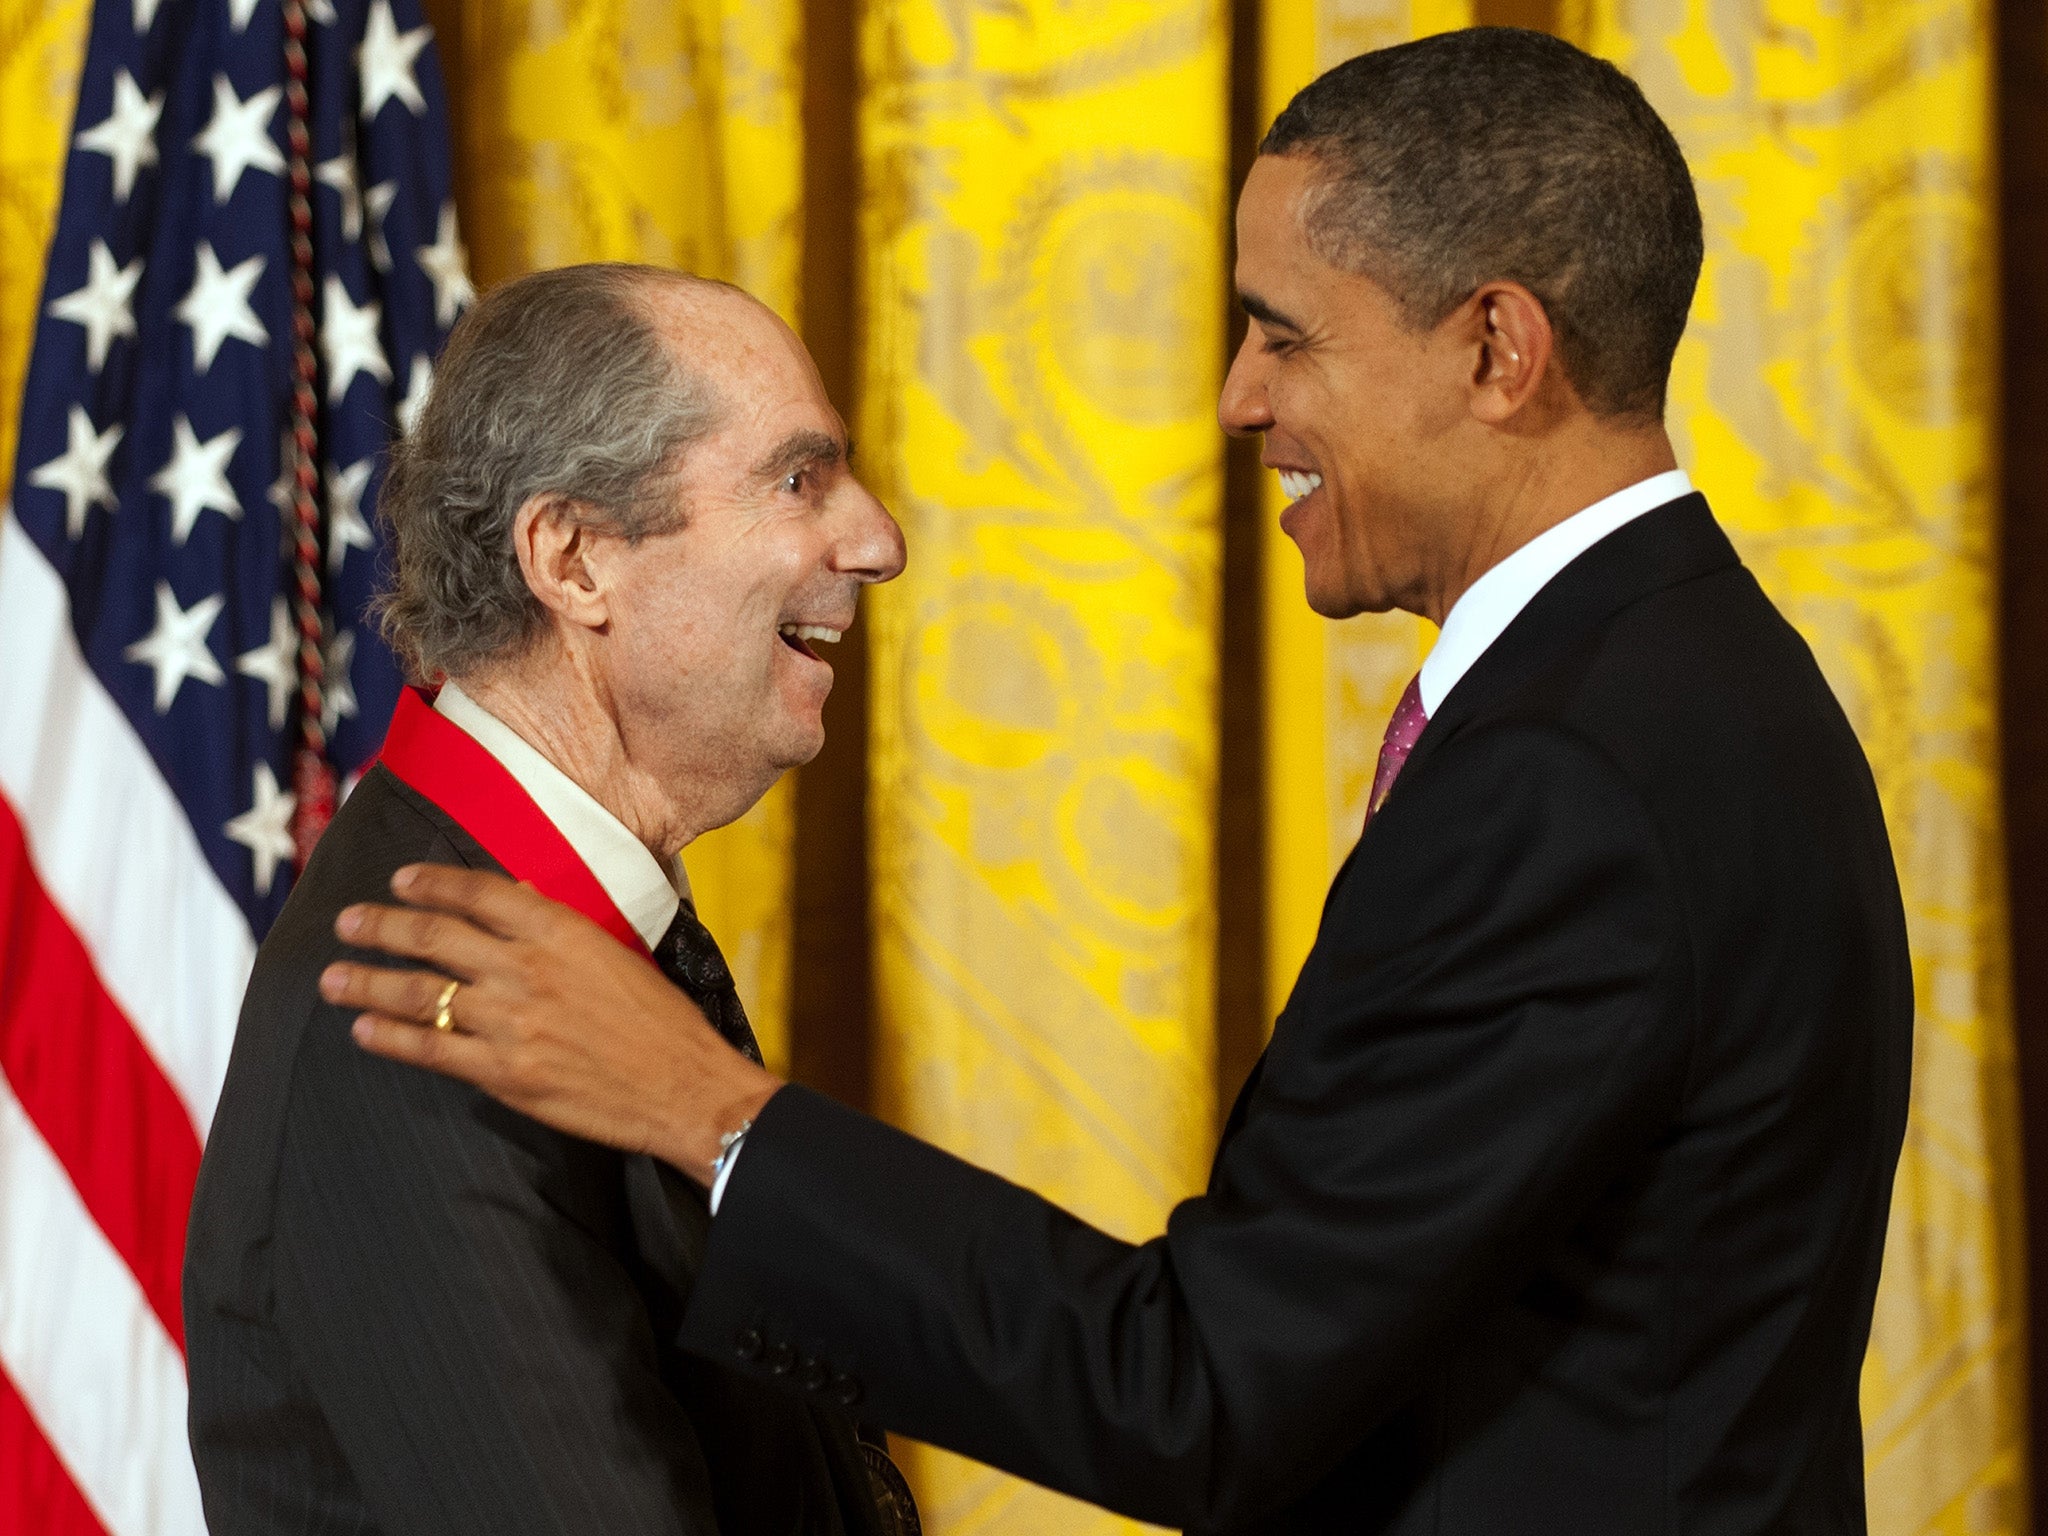 Roth receives the national humanities medal from Barack Obama at the White House in 2011